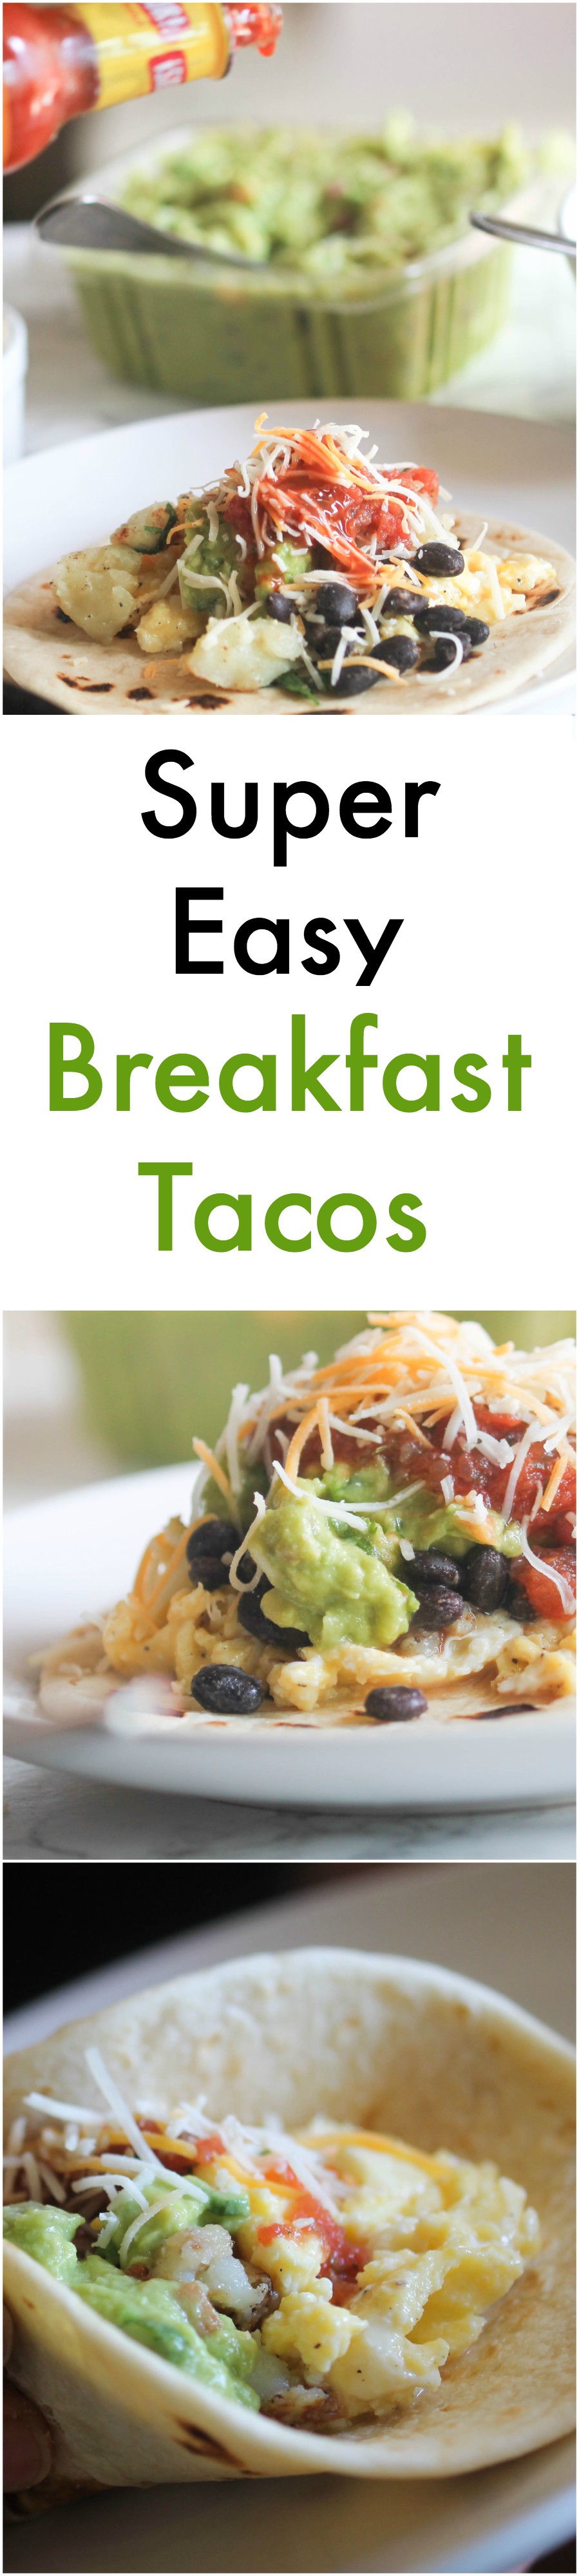 Super Easy Breakfast Taco combines all the basic breakfast taco essentials in 10 minutes or less. It is great for quick breakfast or for feeding a large crowd. Lots of options for vegetarians, vegans, and gluten-free lifestyle.